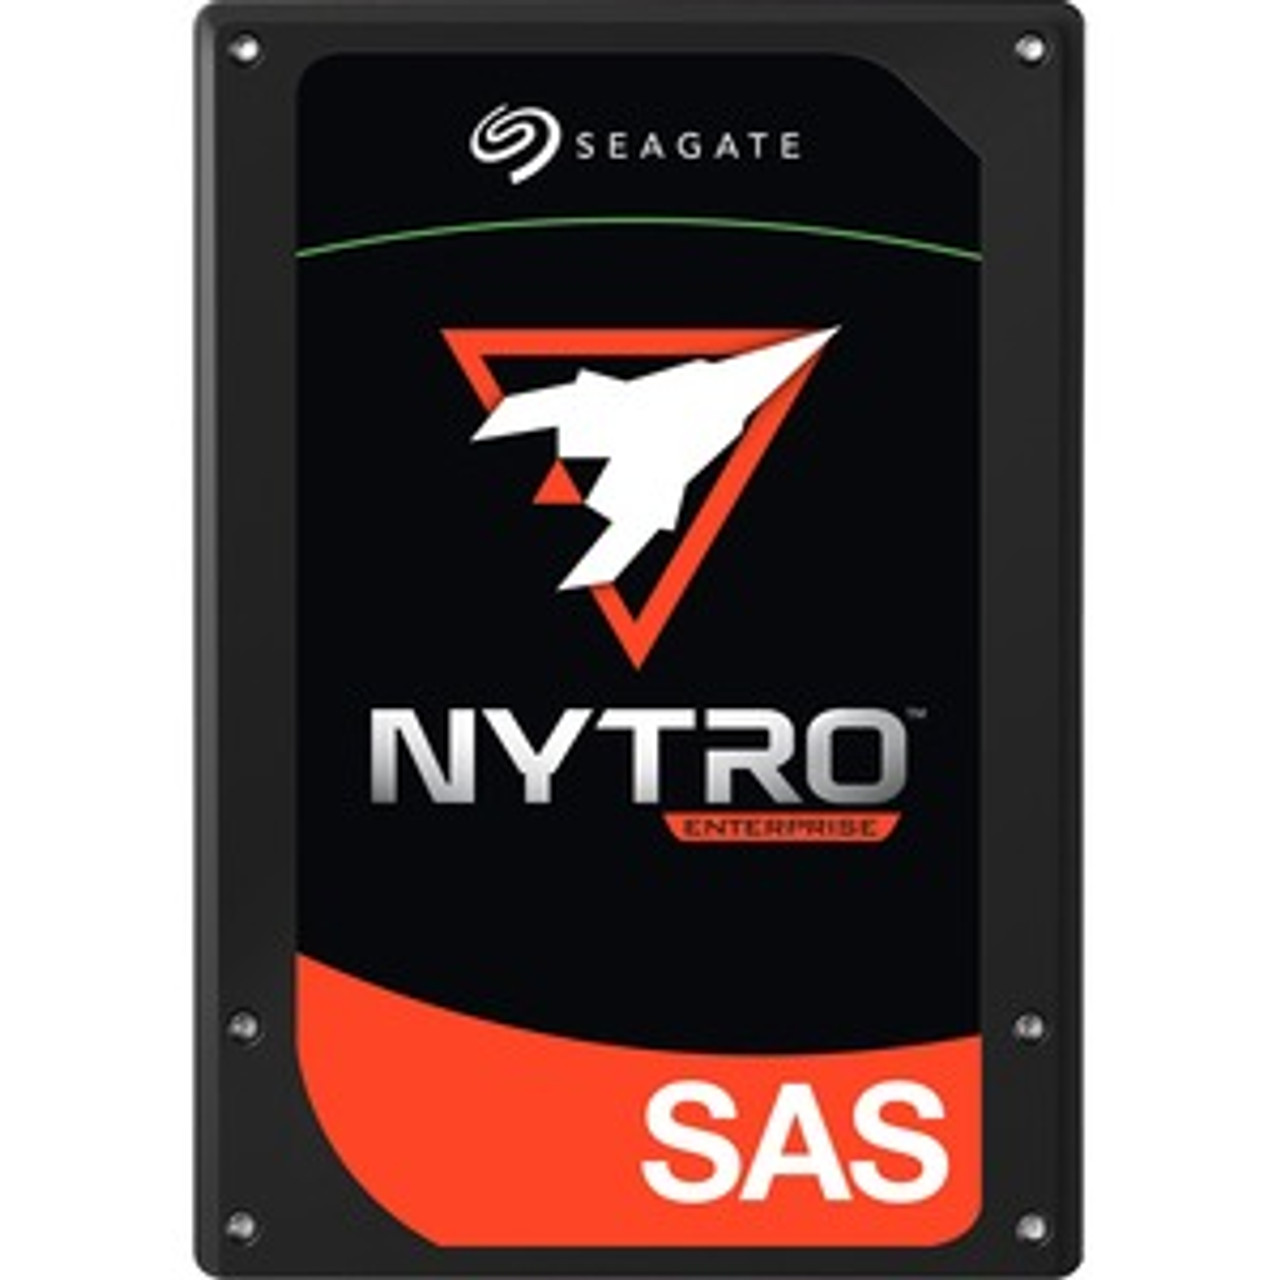 XS960SE10013-10PK Seagate Nytro 3330 960GB eTLC SAS 12Gbps Scaled Endurance (SED) 2.5-inch Internal Solid State Drive (SSD) (10-Pack)